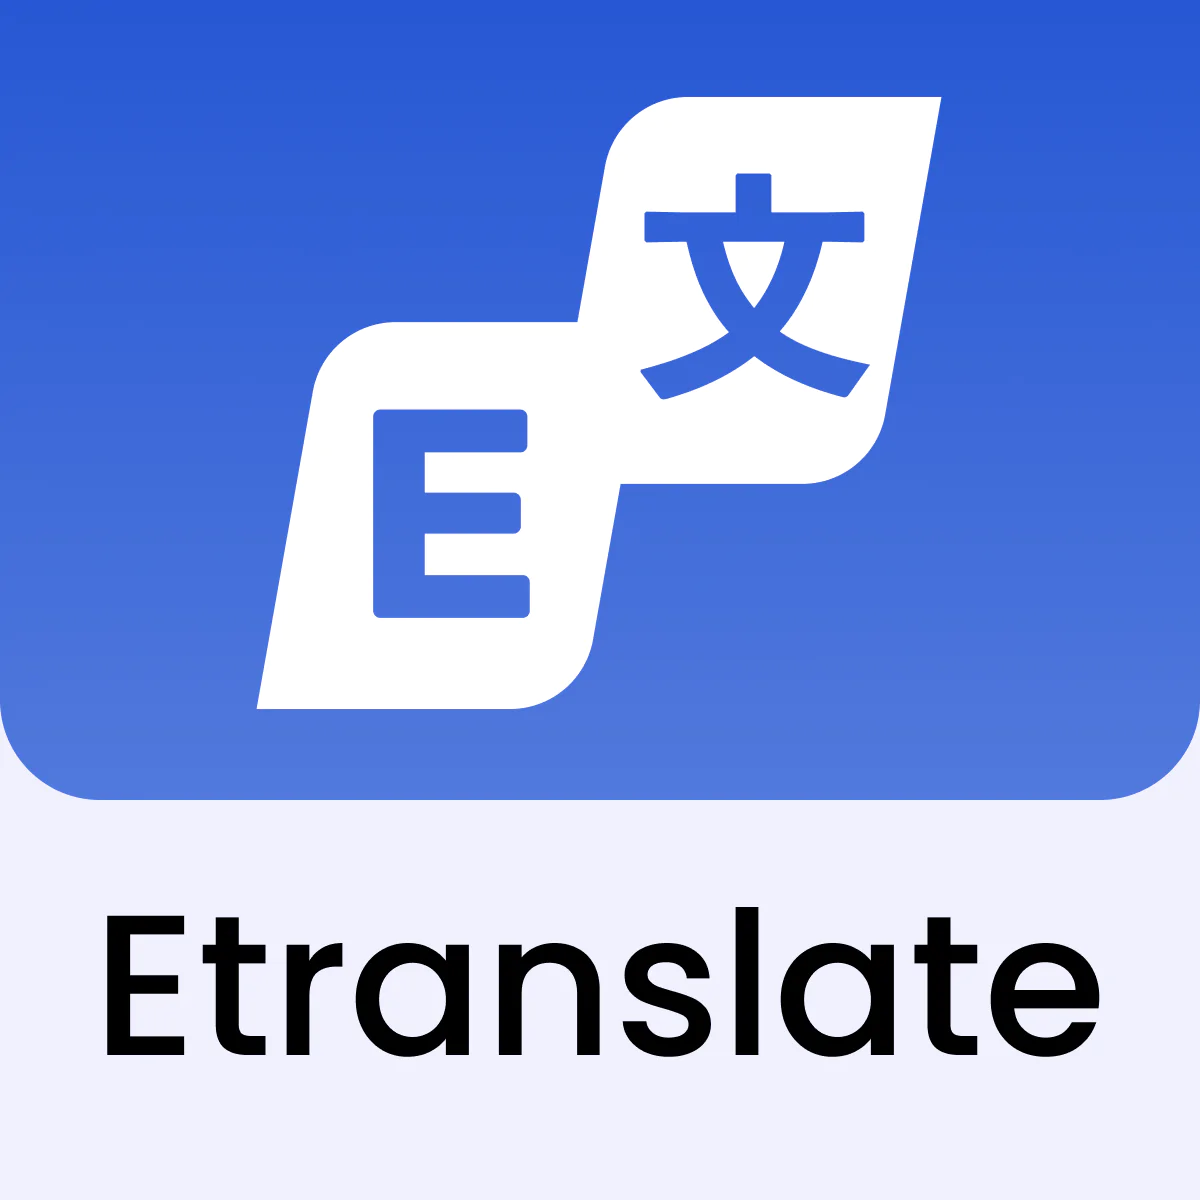 ET Language Translate‑Currency